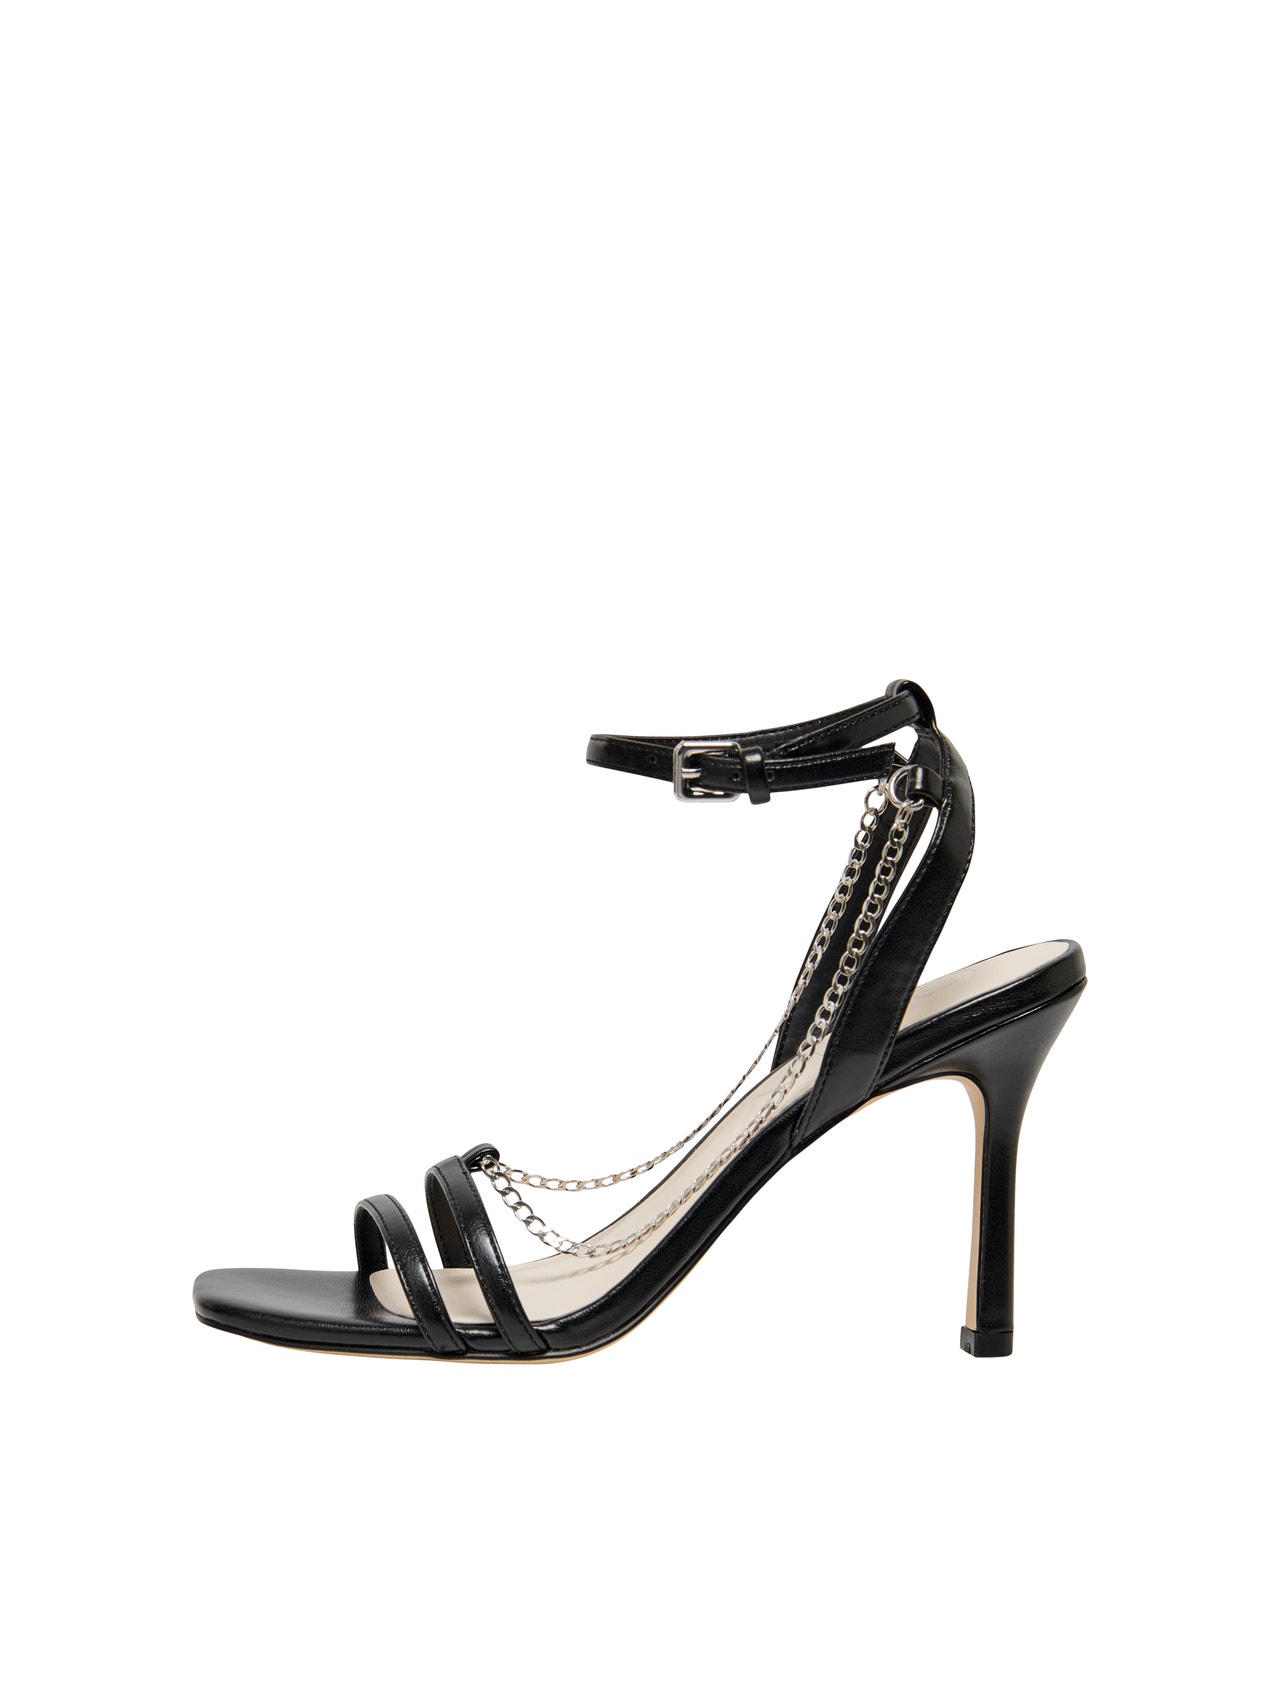 ONLY Heeled sandal with chain -Black - 15288440